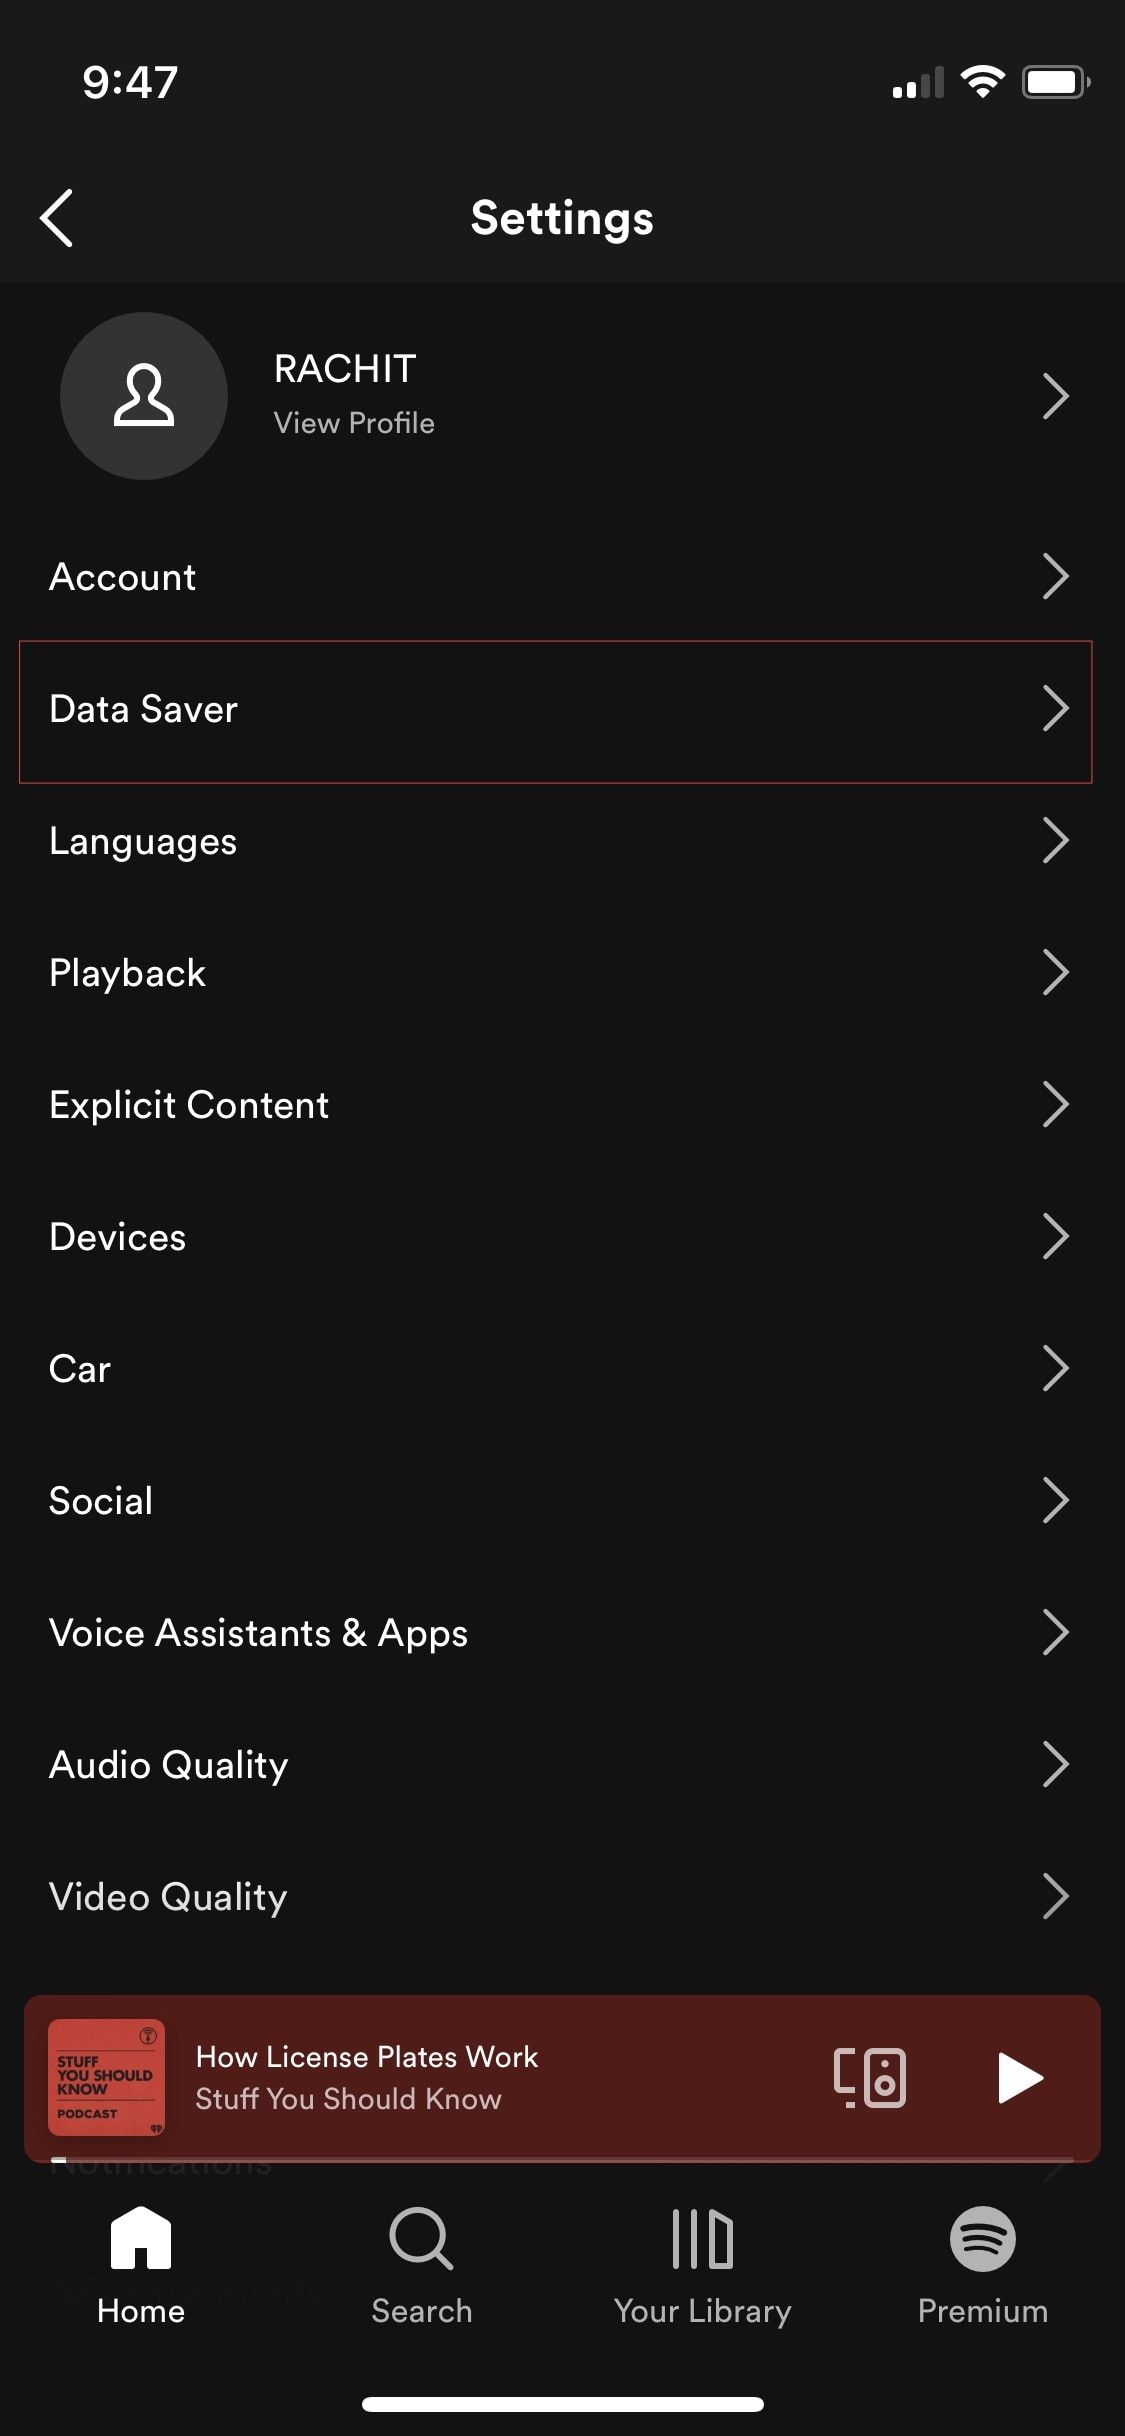 spotify settings page for iPhone app